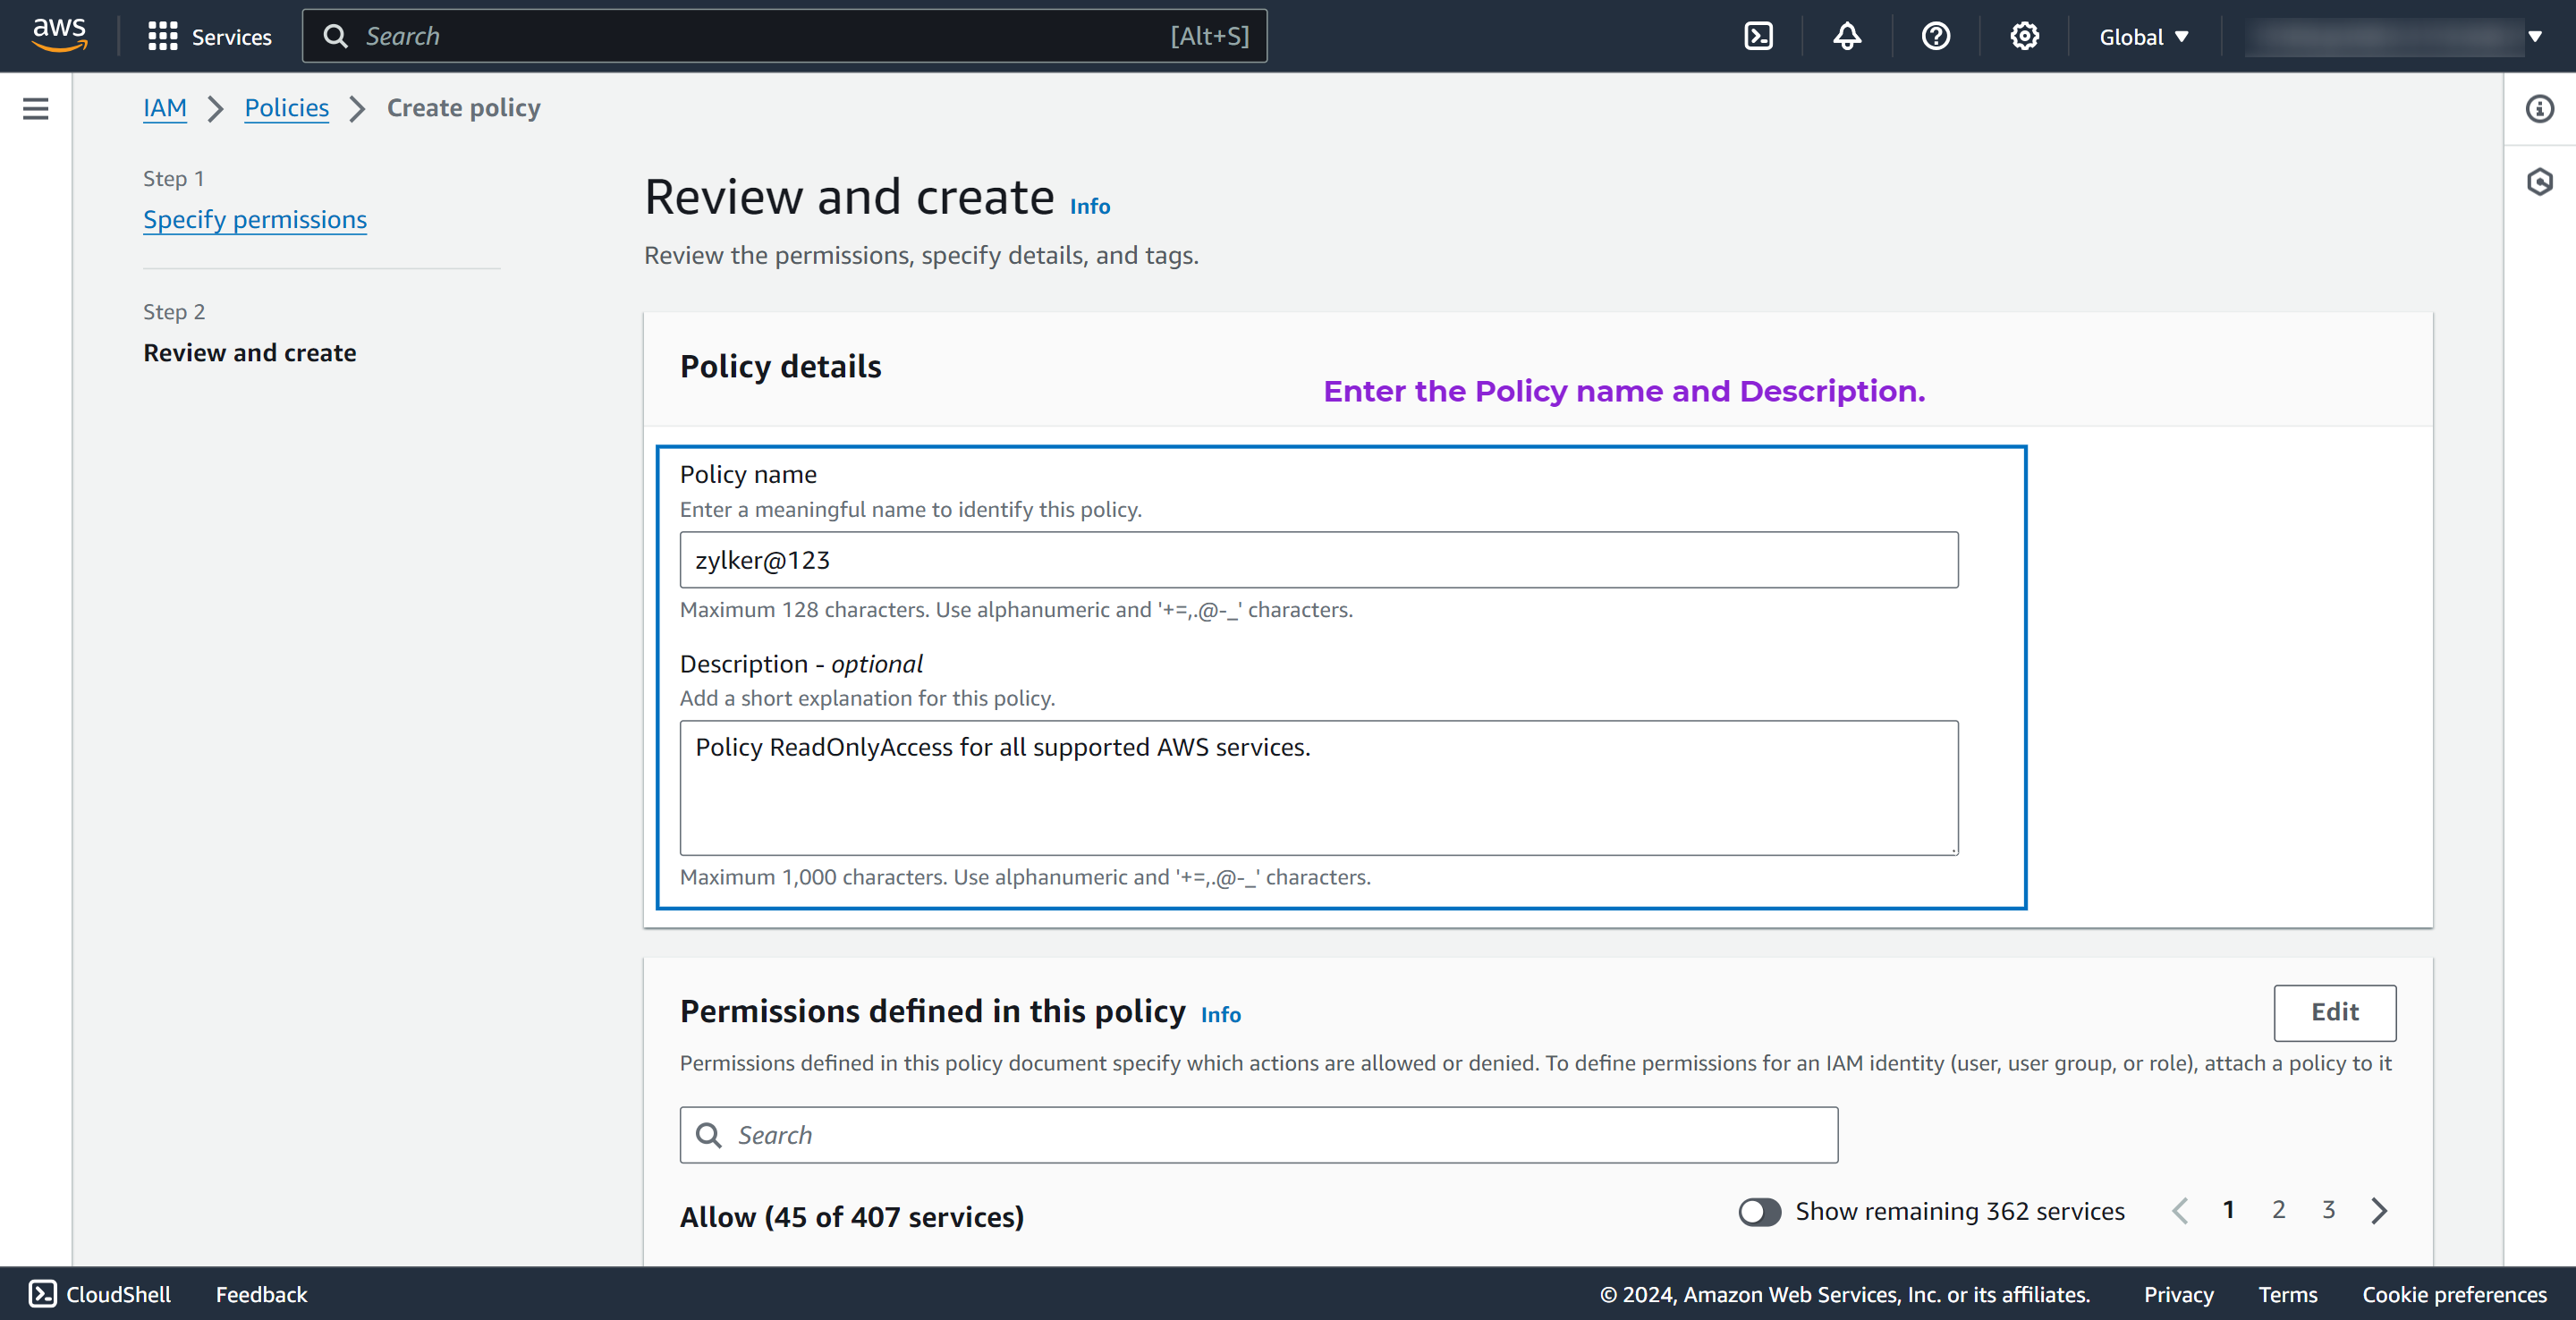 Review policy updated